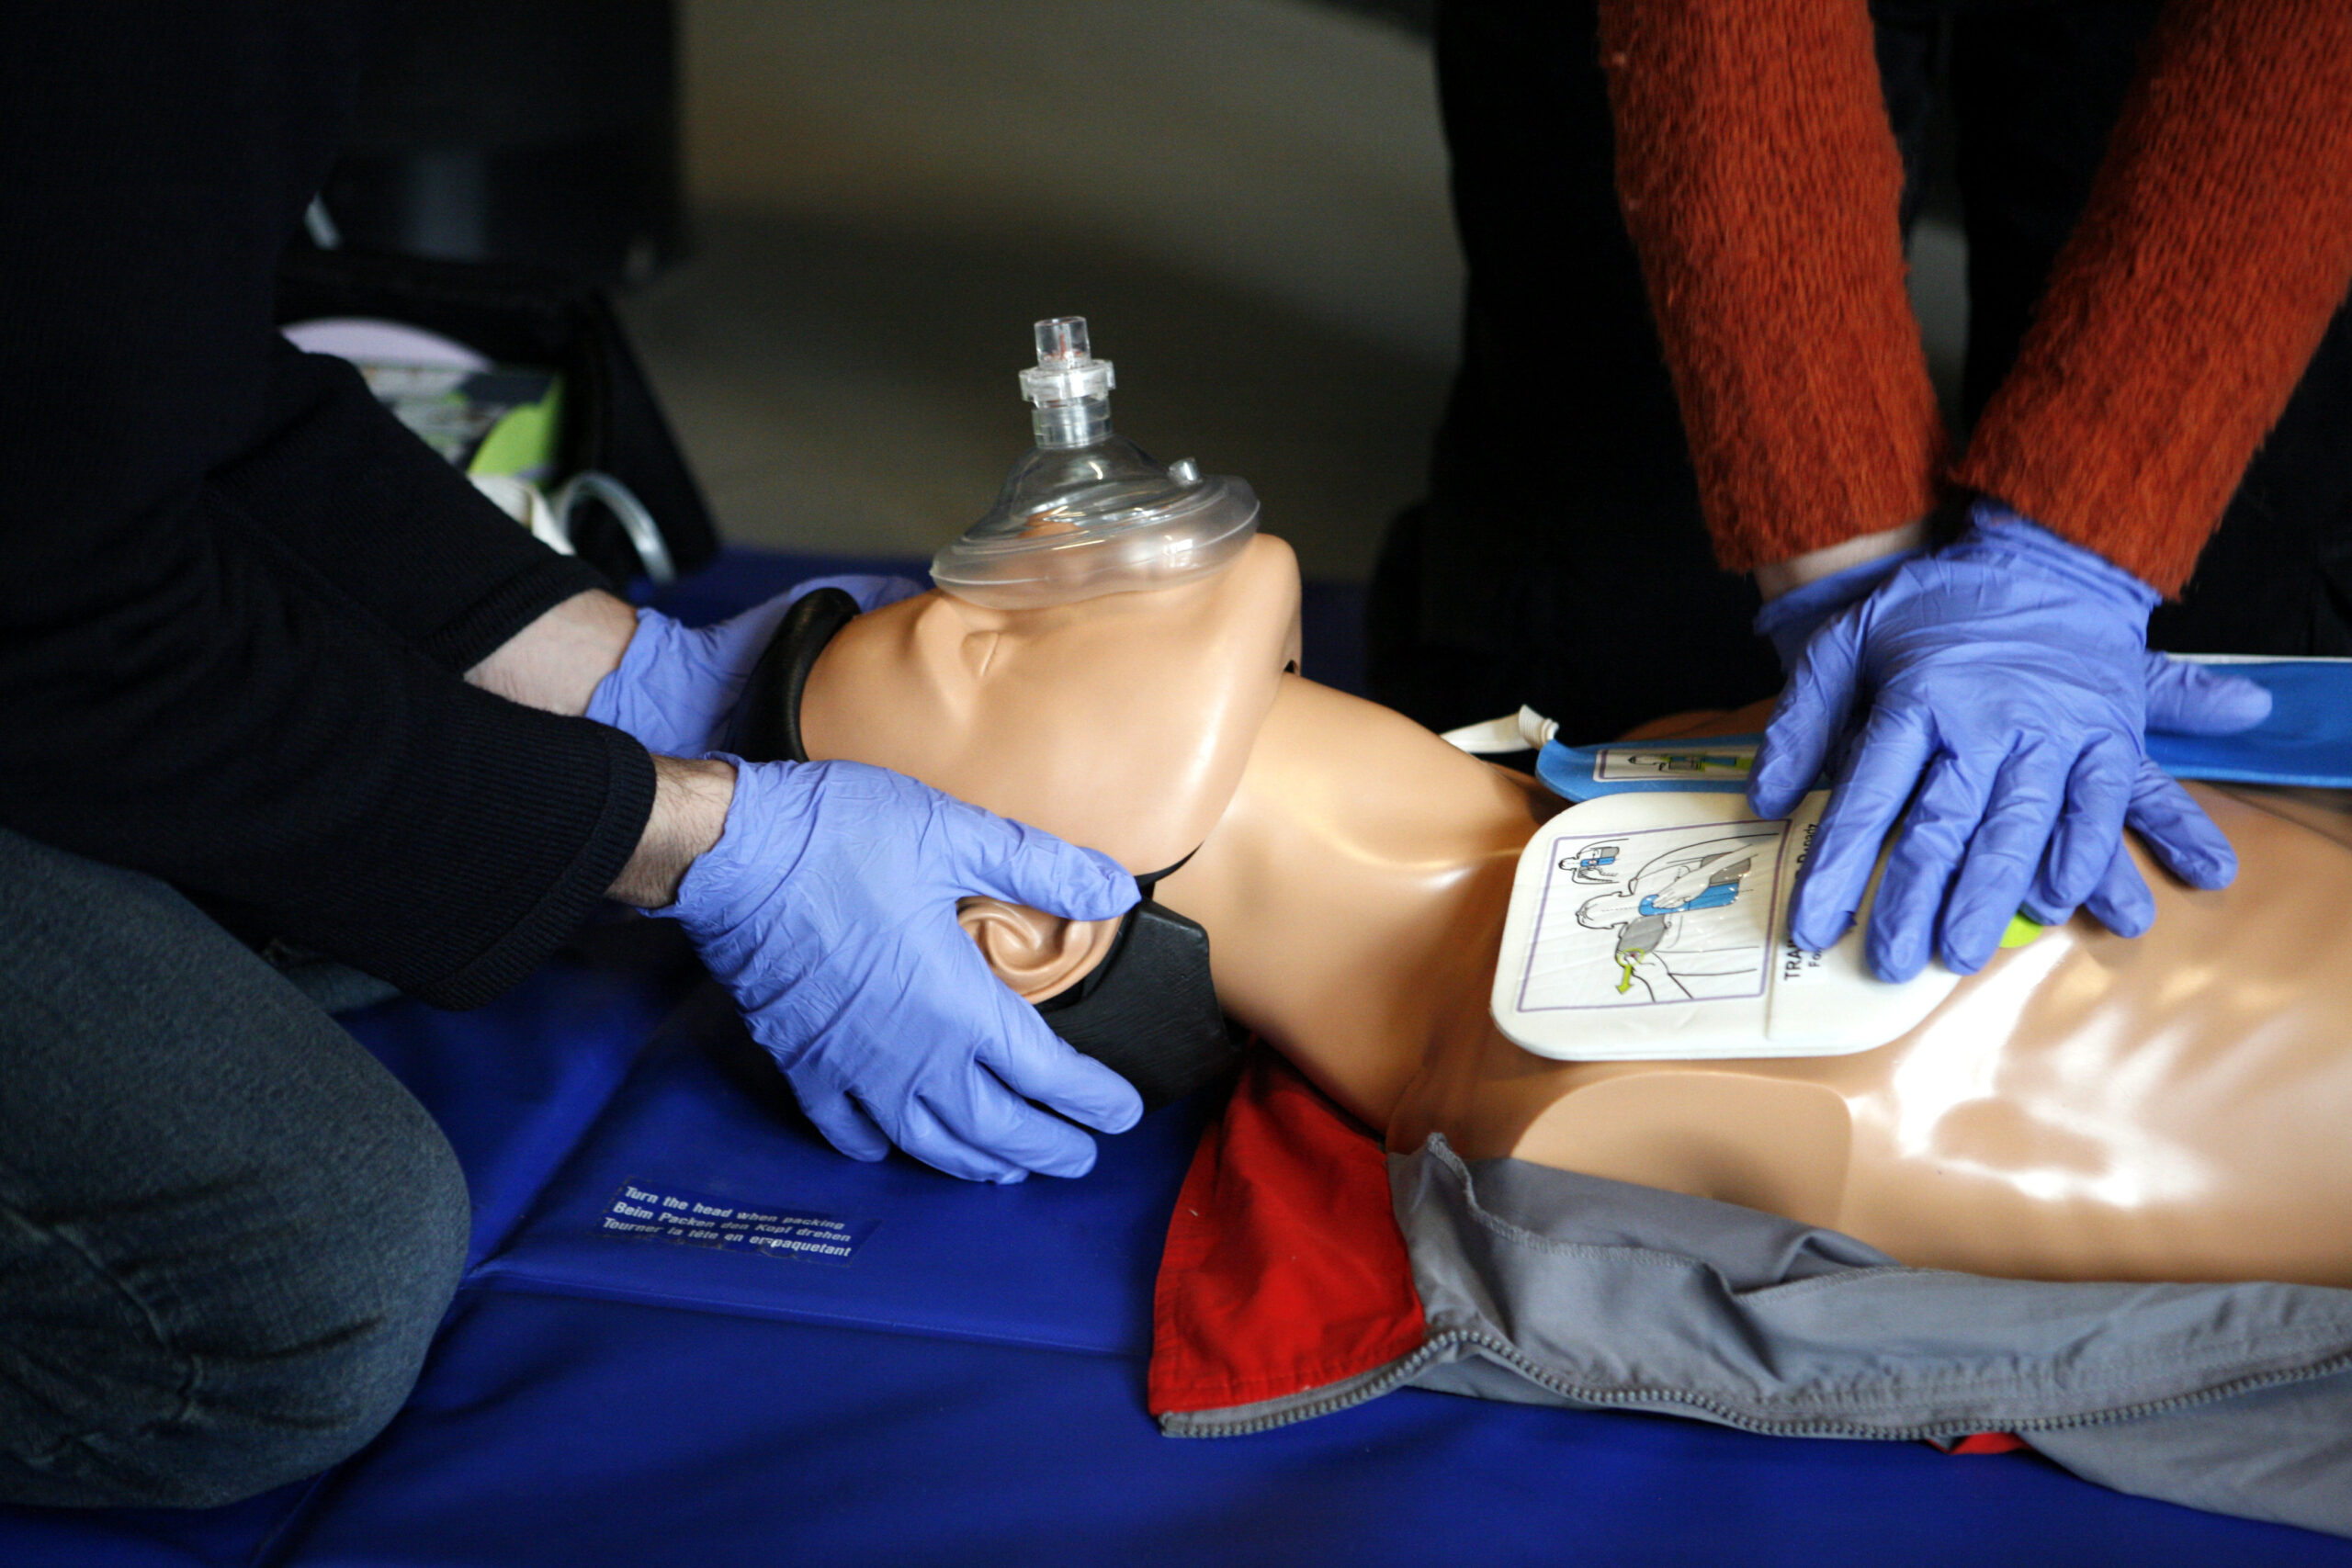 BLS Training Teaches How To Do CPR